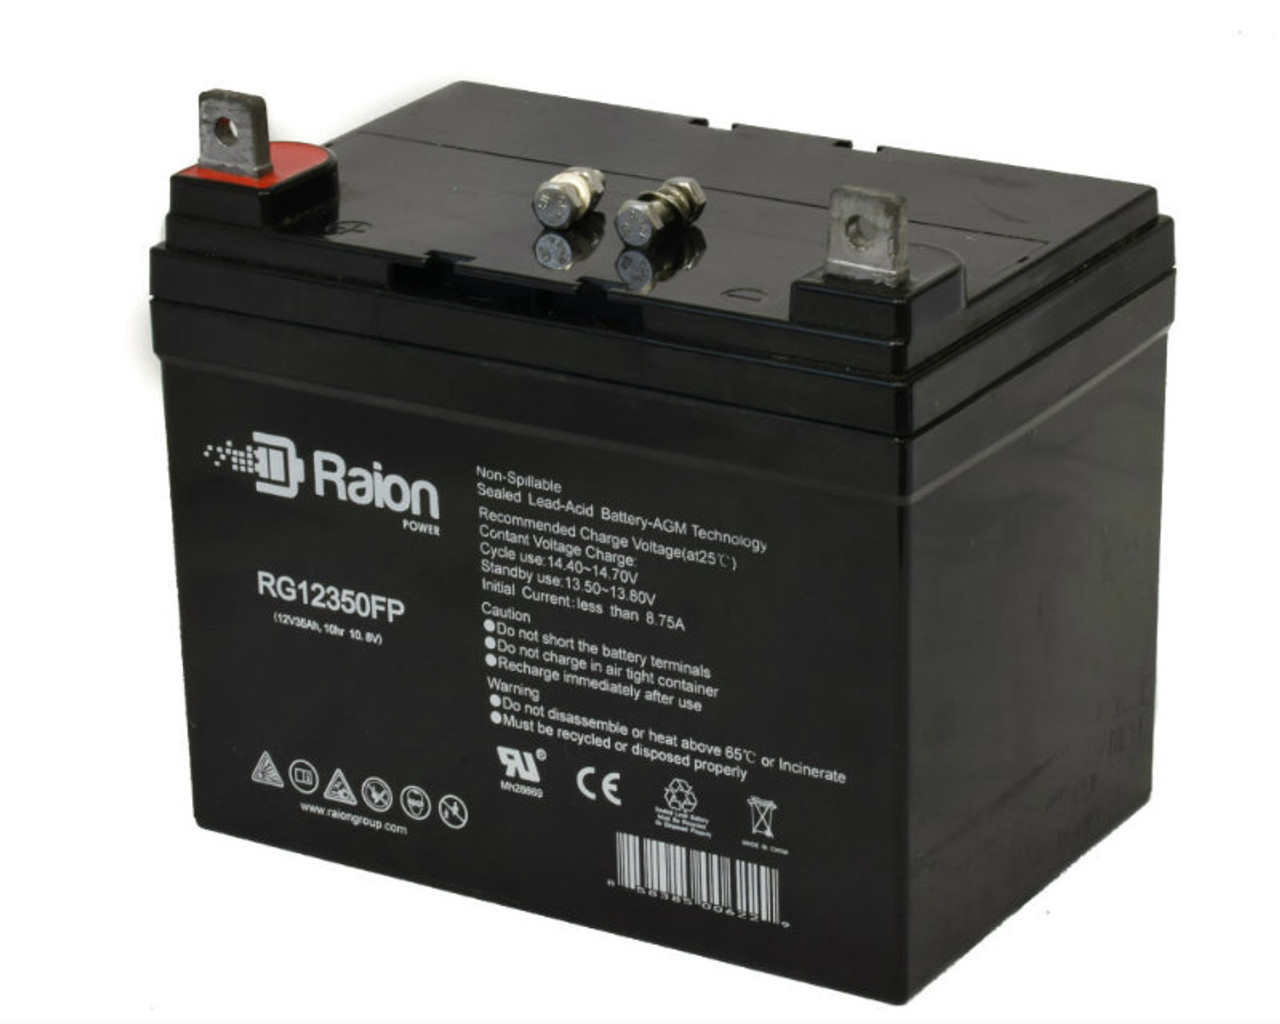 Raion Power Replacement 12V 35Ah Battery for Ingersol Equipment 808 - 1 Pack